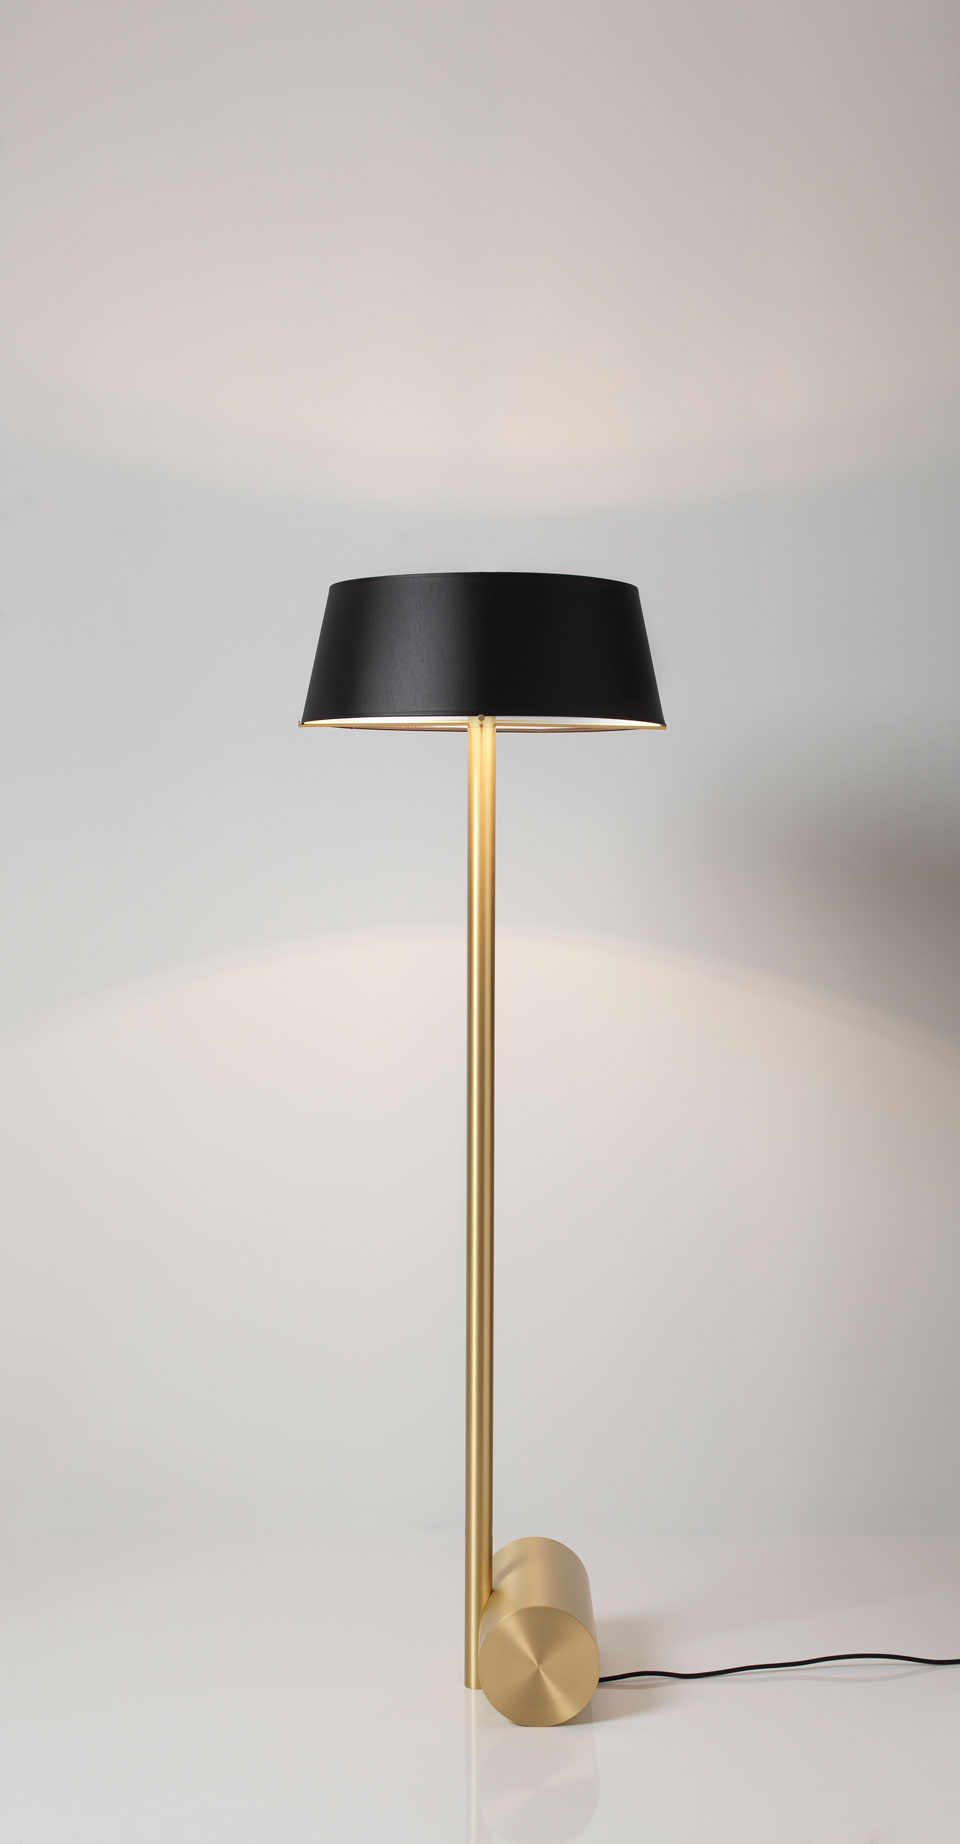 Floor Lamp With Dimmer Cylindrical Base Elegant Contemporary Design Black Percaline Lampshade in size 960 X 1844